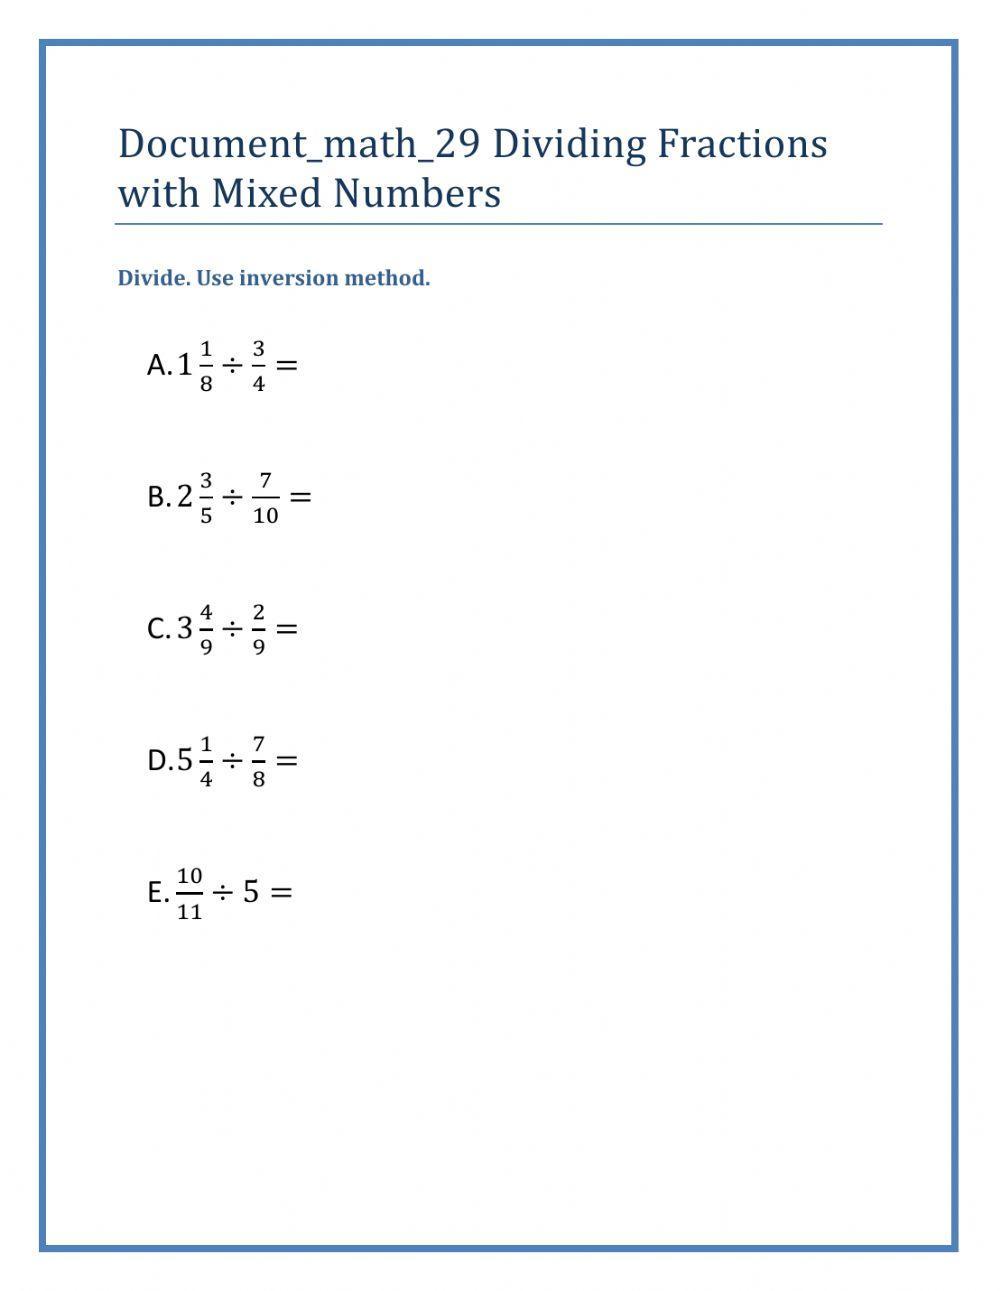 Dividing Fractions with Mixed Numbers